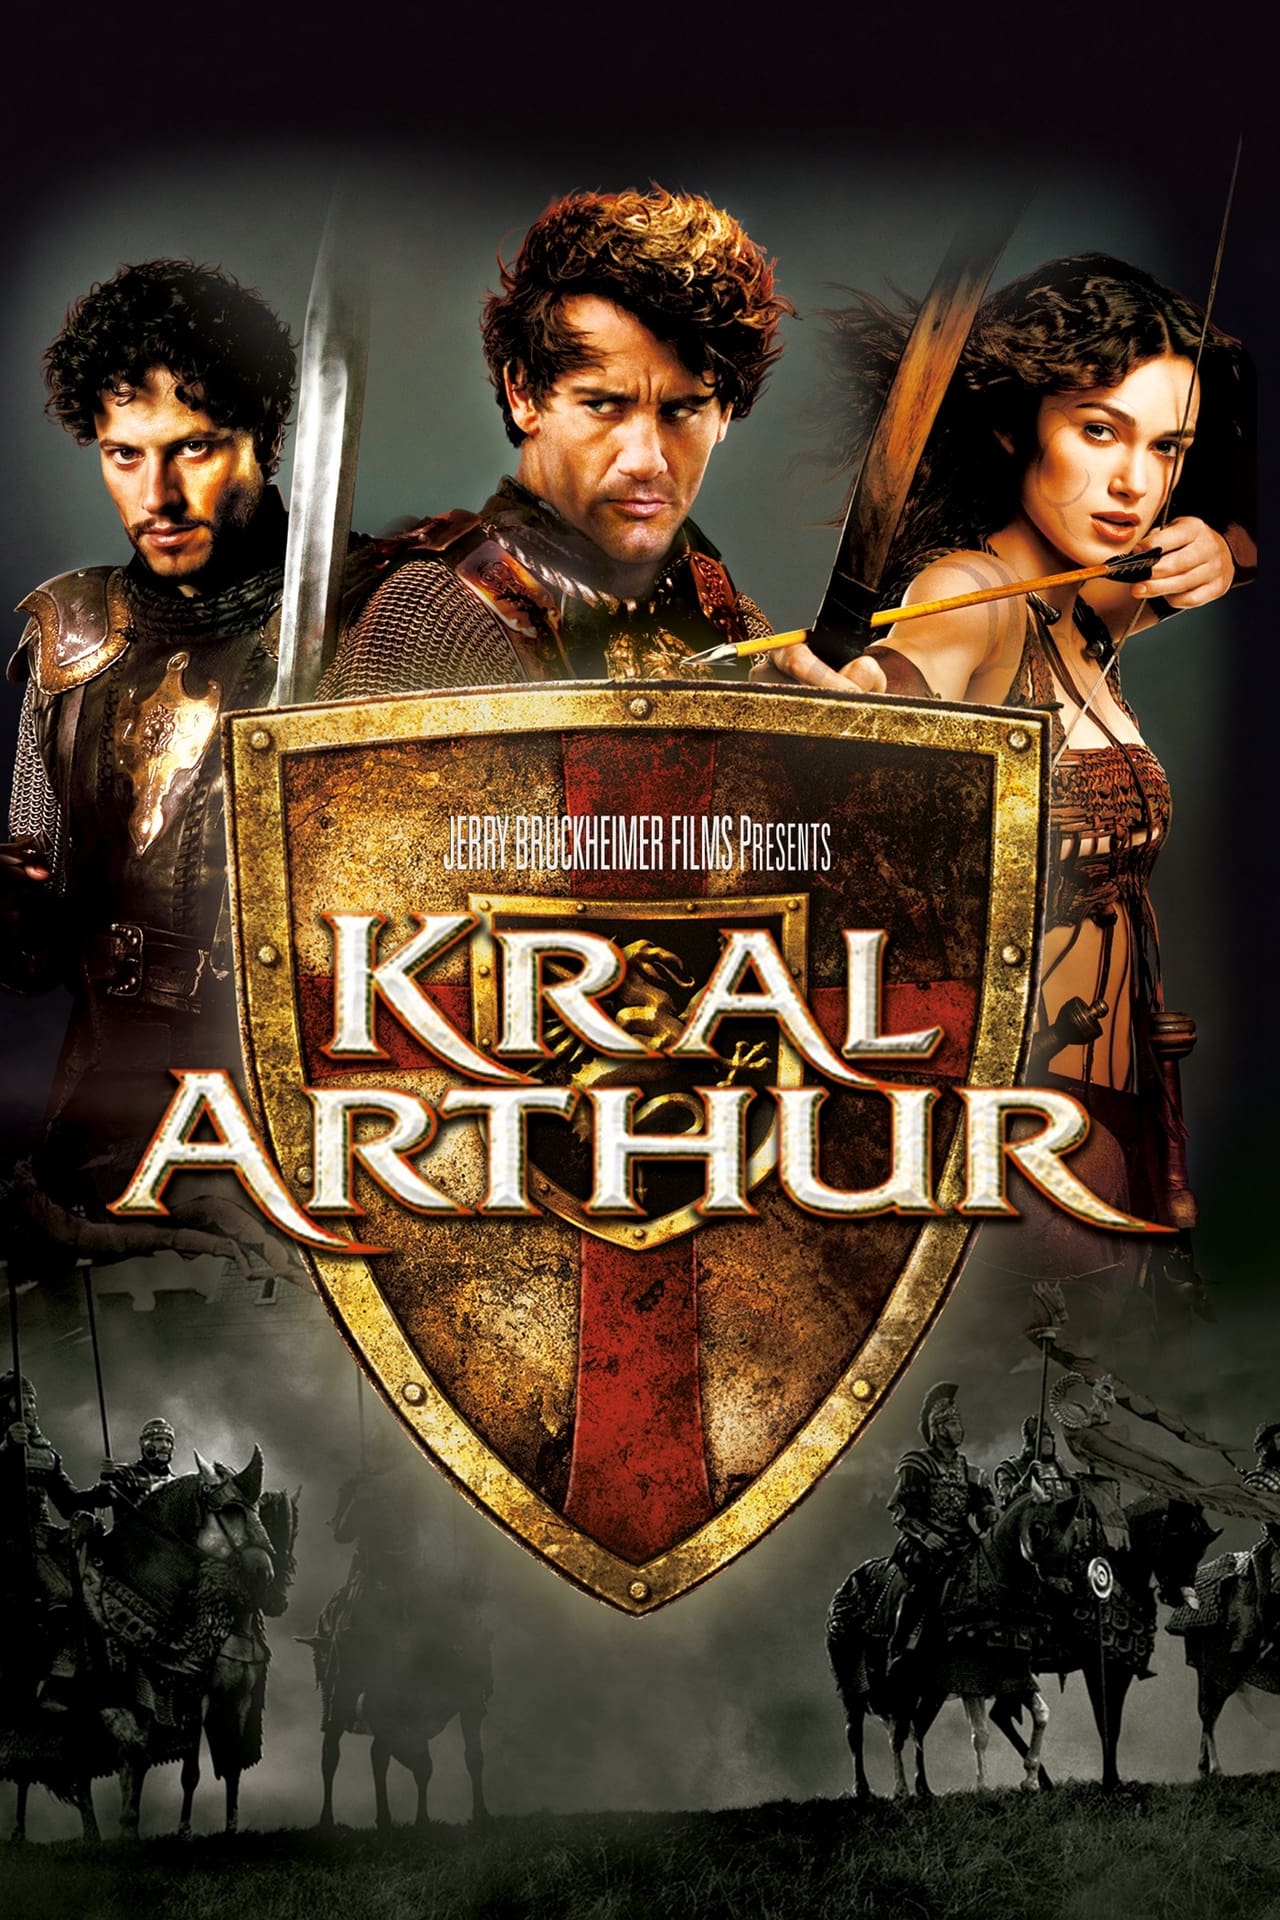 King Arthur (2004) Director's Cut&Unrated Edition 384Kbps 23.976Fps 48Khz 5.1Ch DVD Turkish Audio TAC